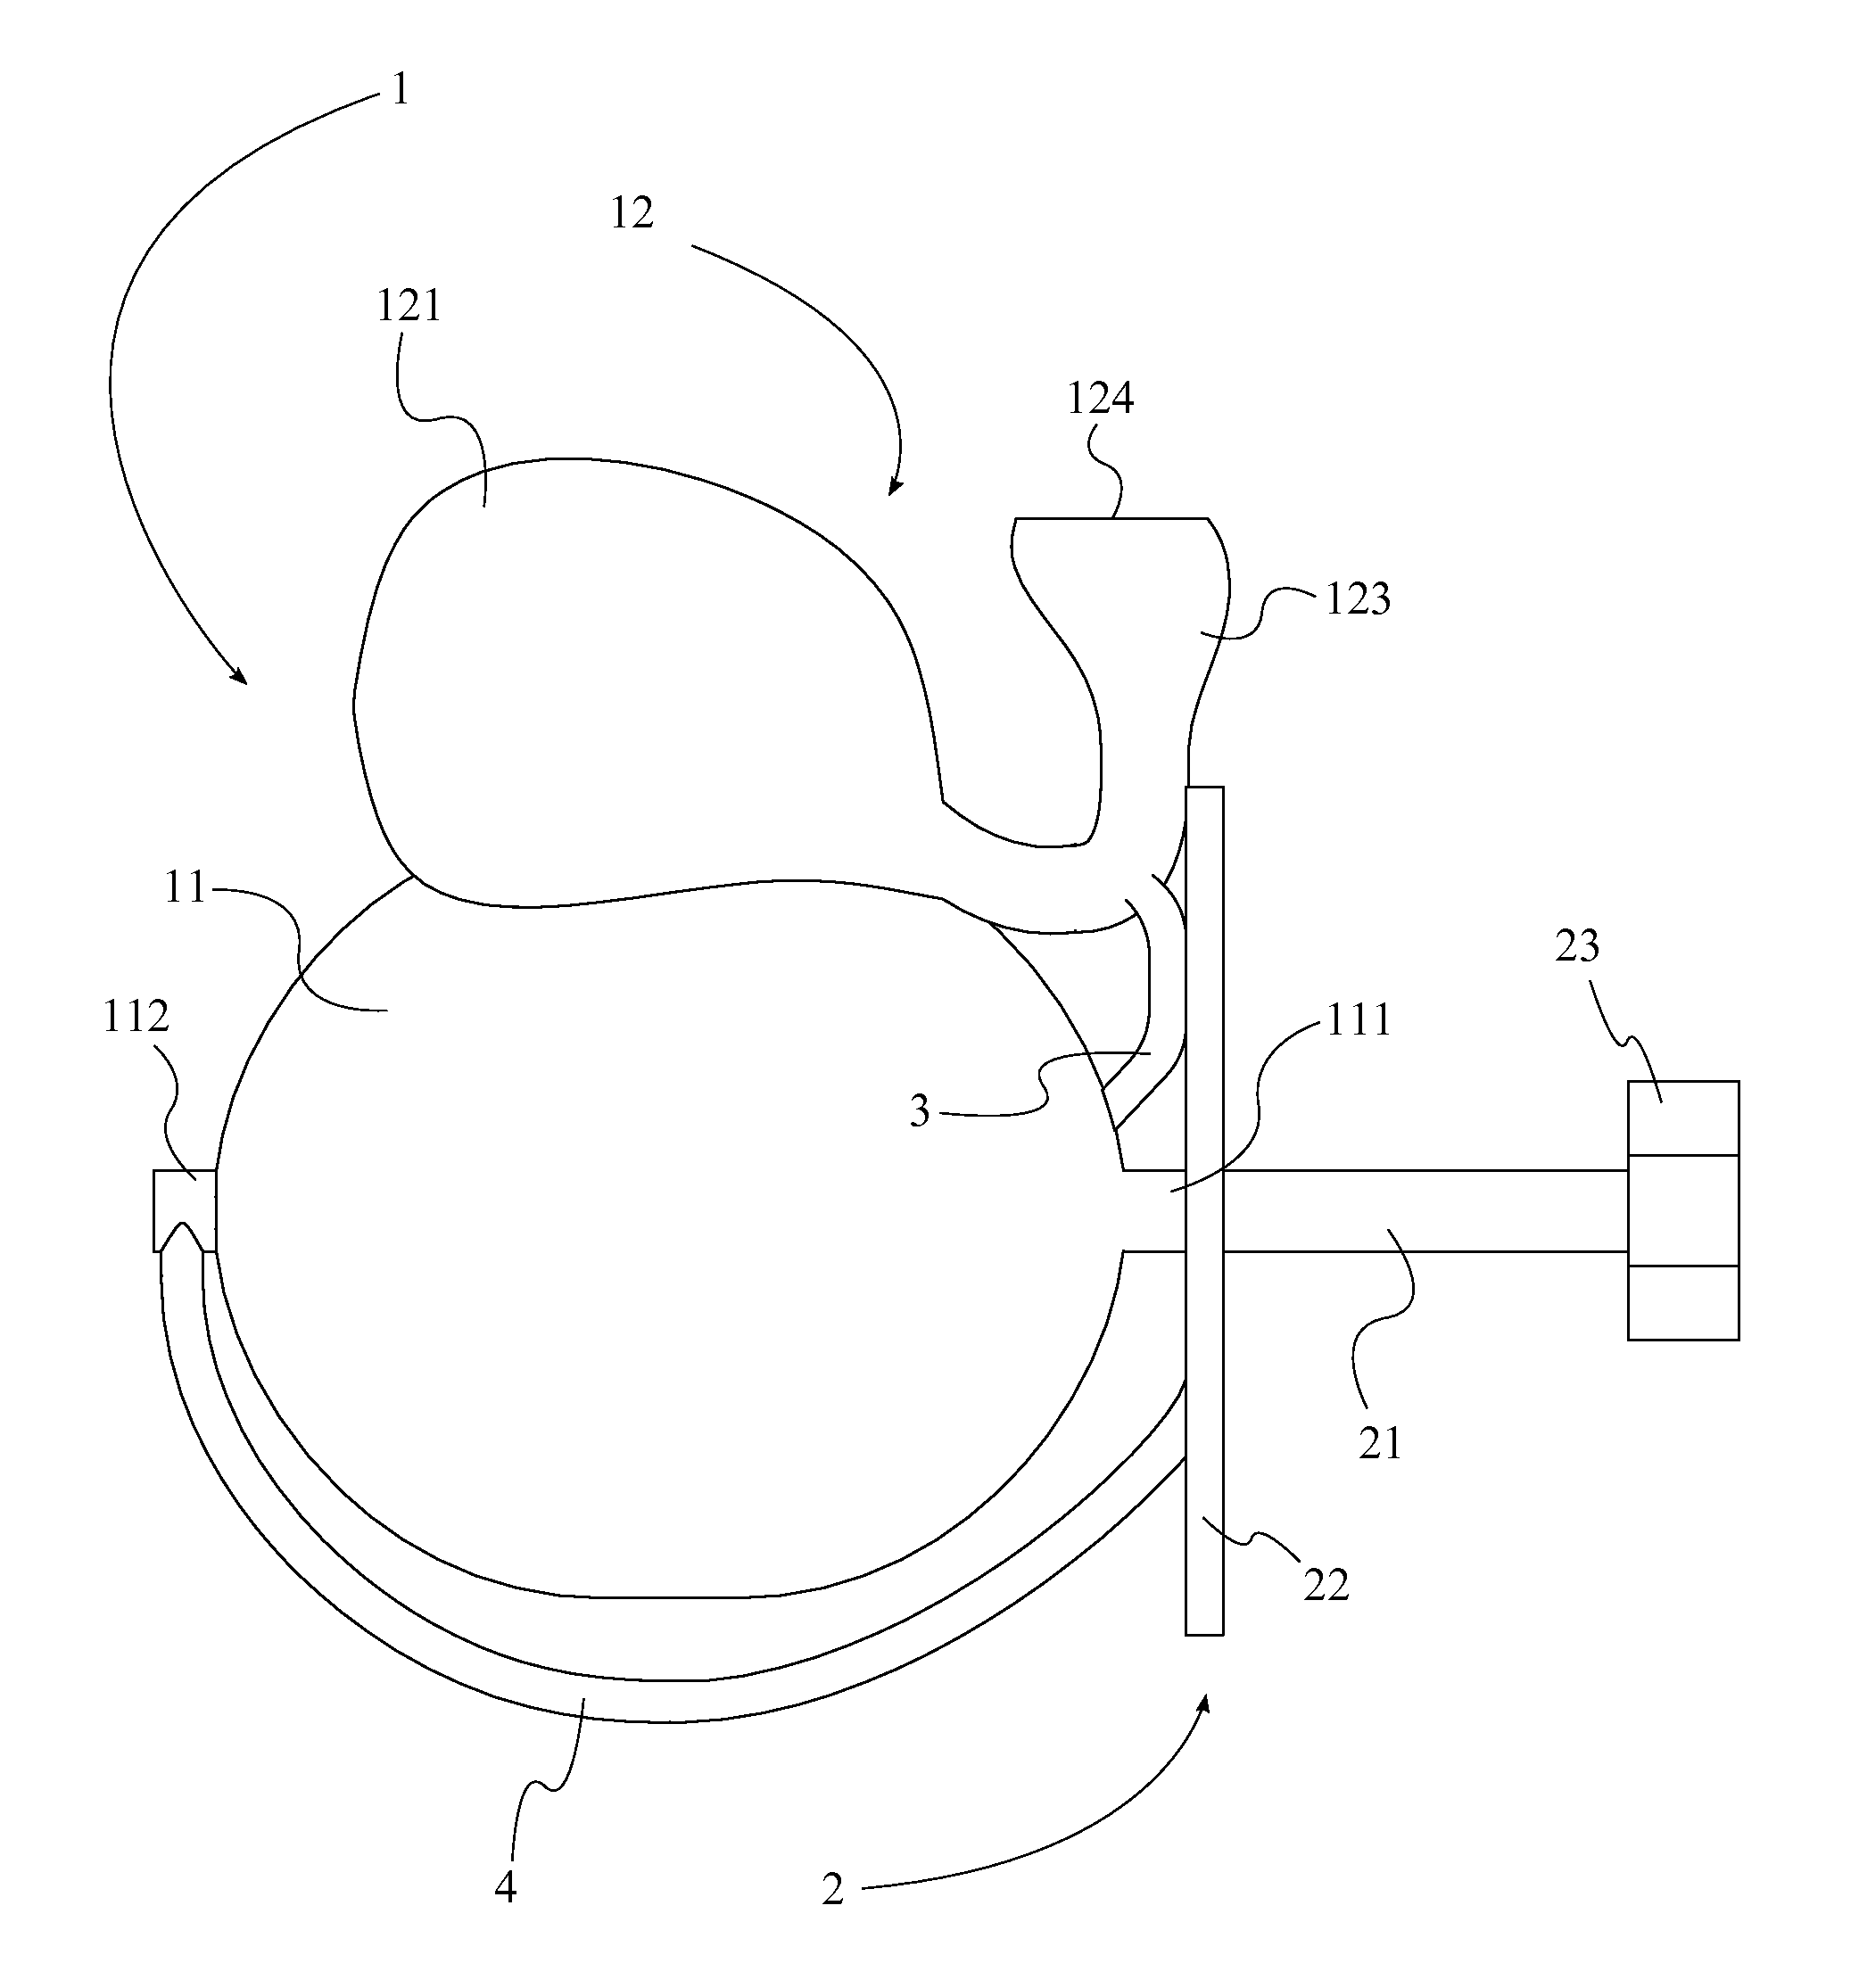 Training device for treating snoring and apnea